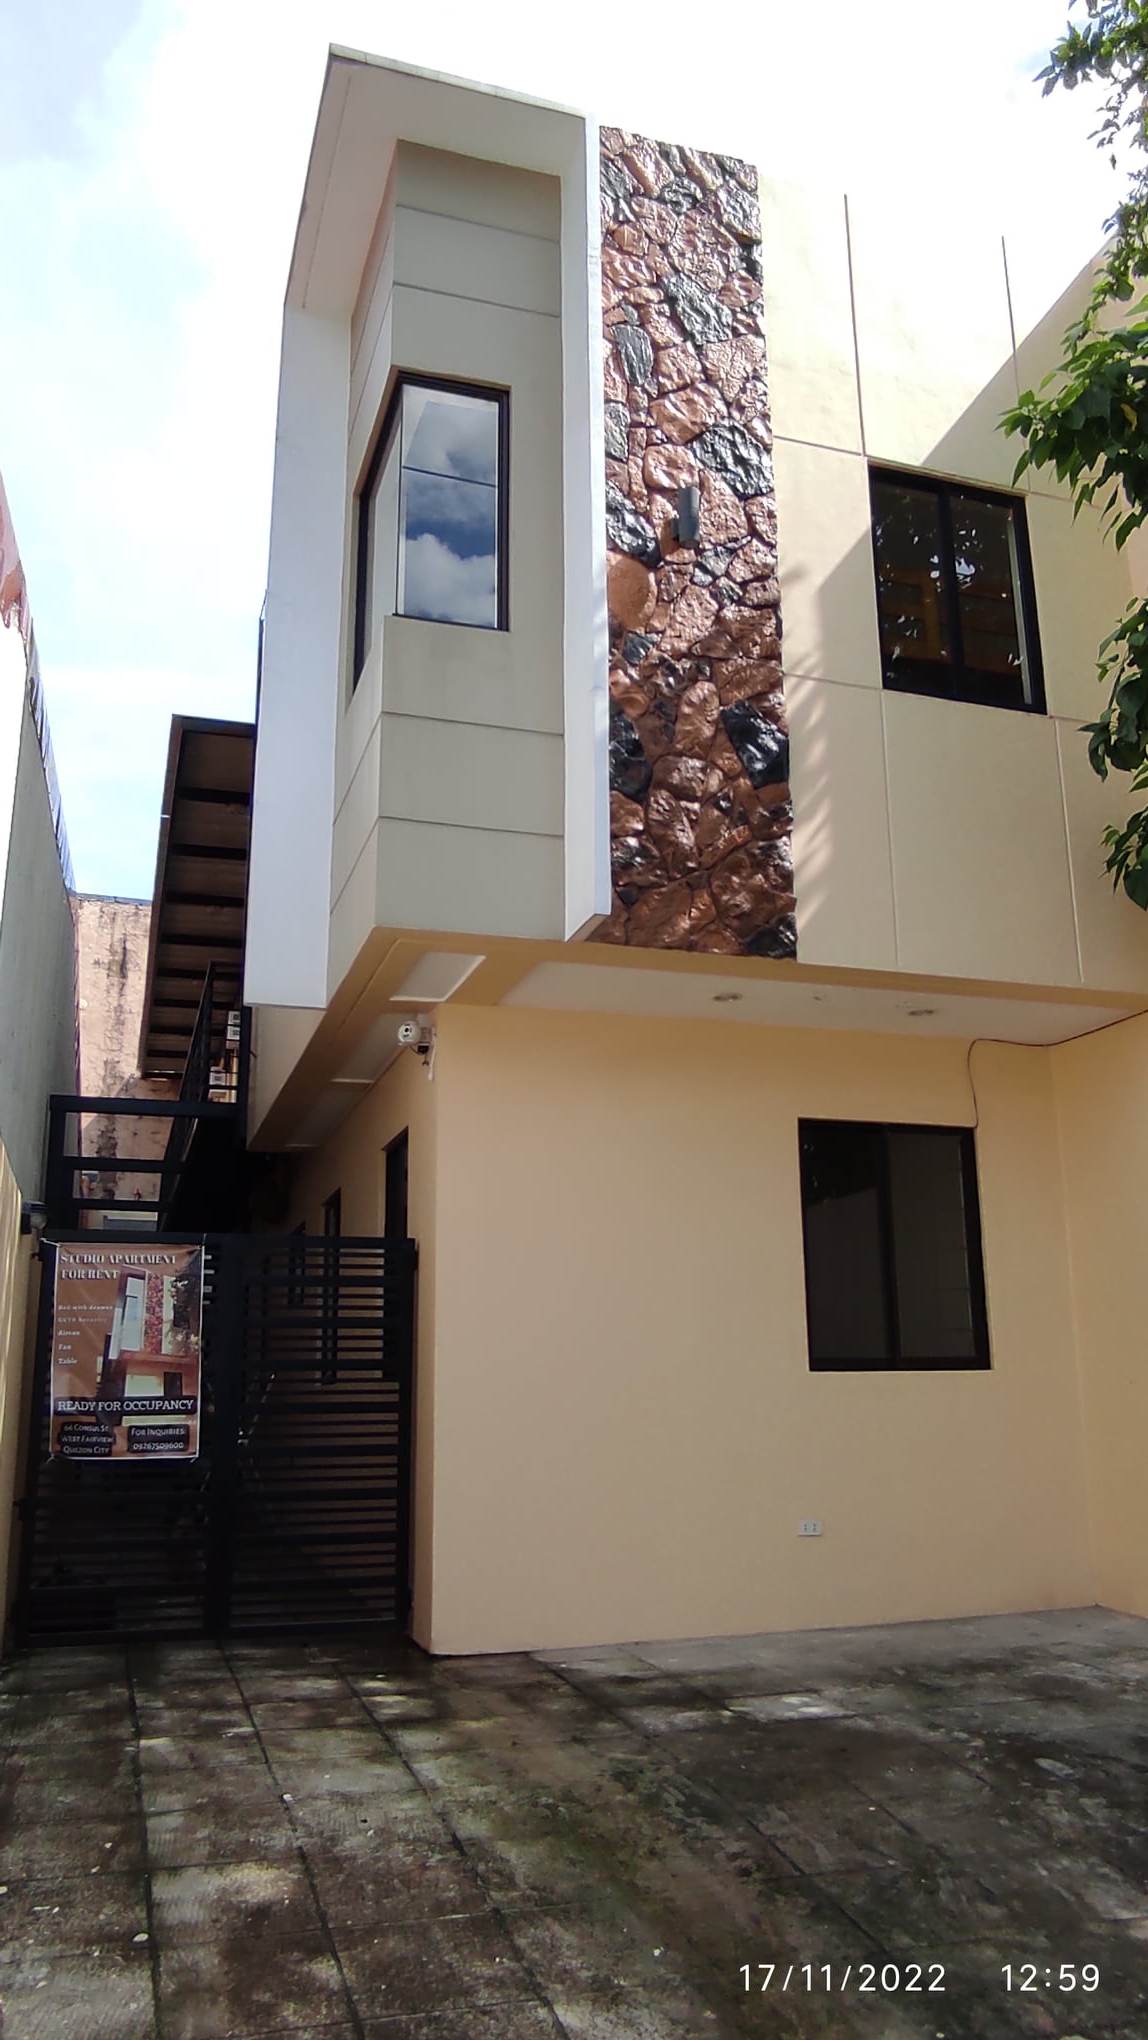 Newly Constructed Apartment with 5 Studio type units for Rent near FEU-NRMF